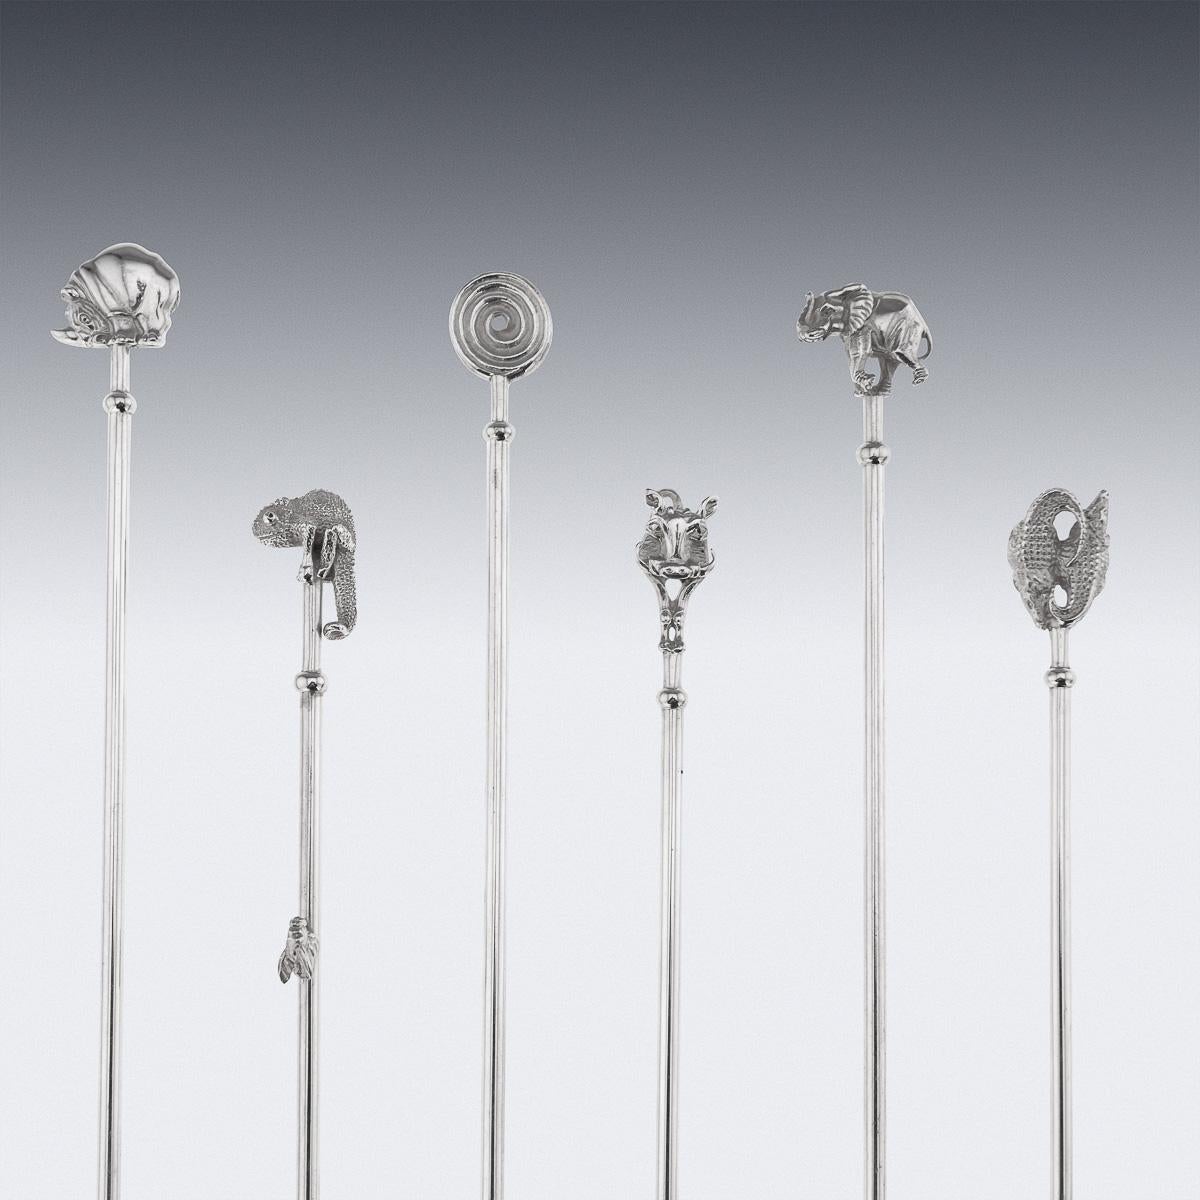 Patrick Mavros solid silver set of six cocktail spoons, decorated with cast figures of African animals. The set comes in its original box. Hallmarked silver (925 Standard), Maker's Maker's PT (Patrick Mavros).

CONDITION
In Great Condition - No